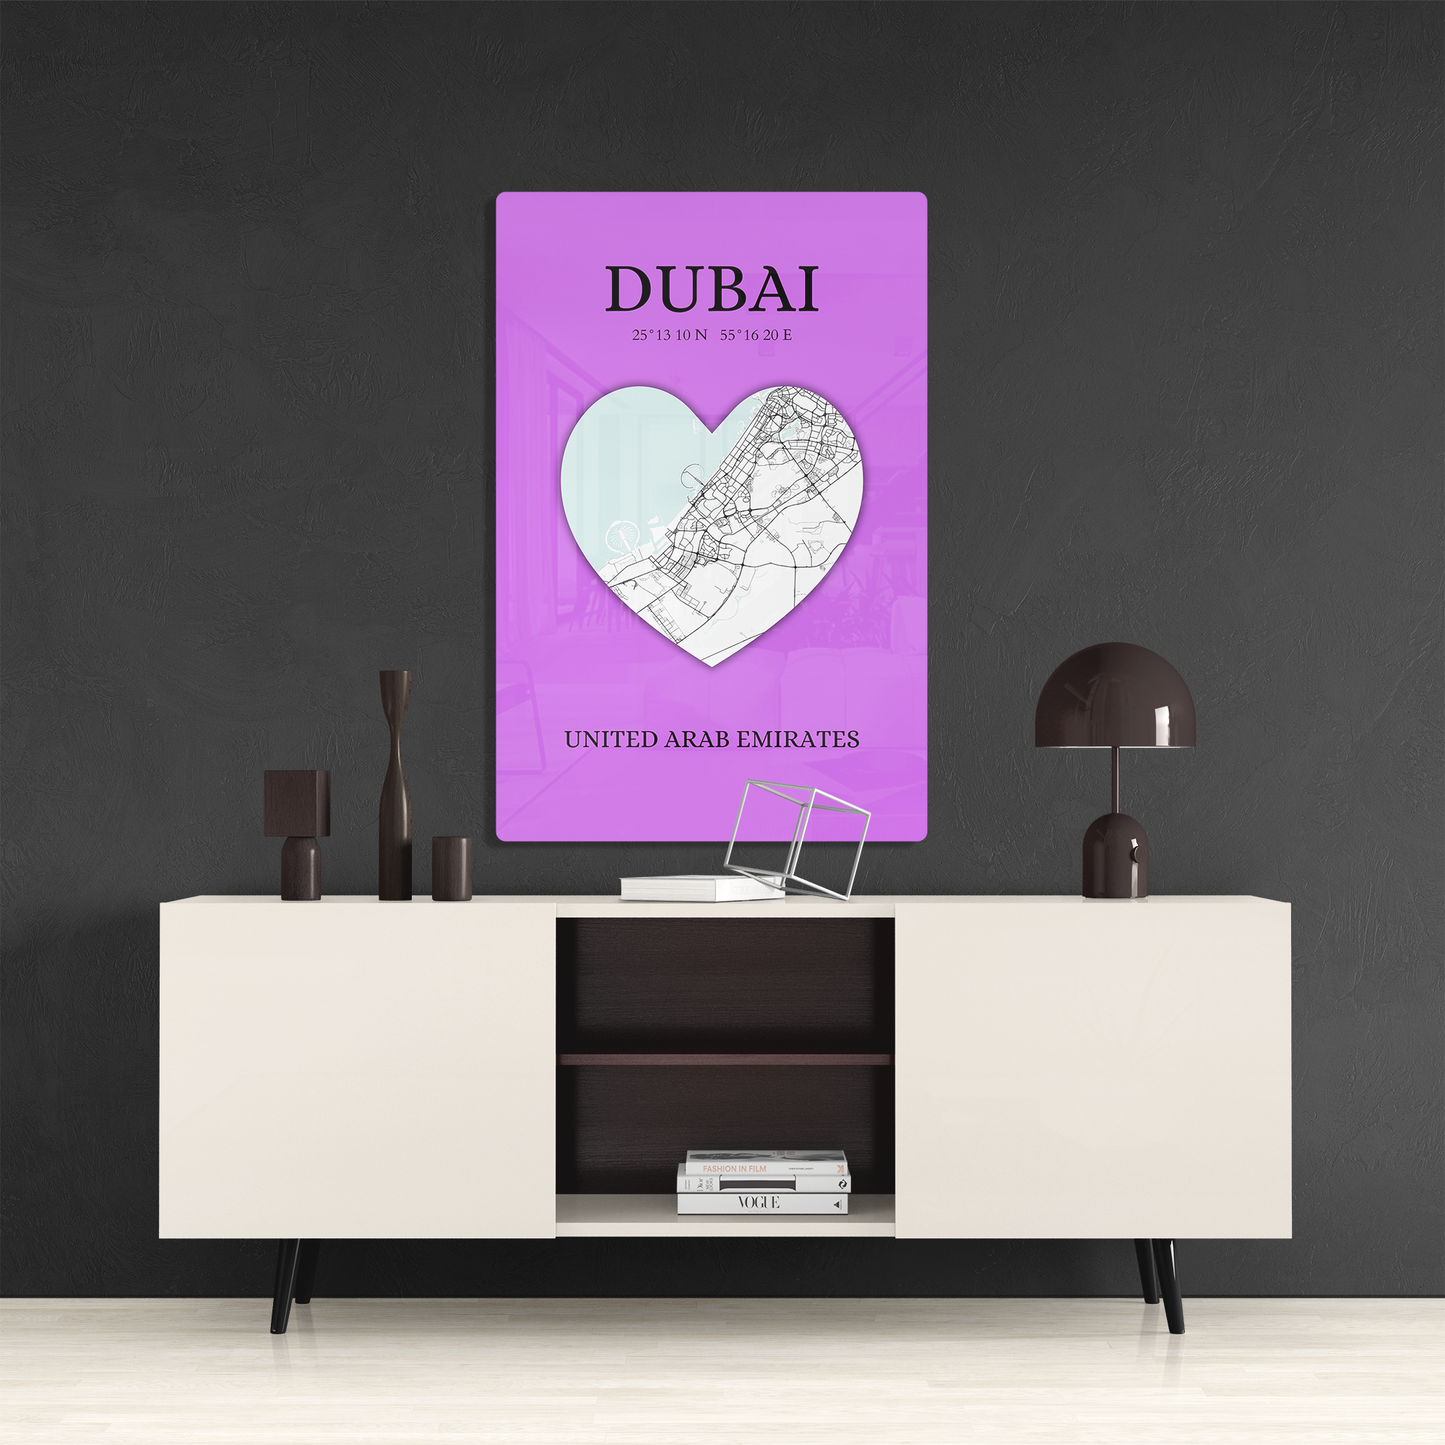 Dubai Heartbeat - Purple (Acrylic)Step into the universe with Vibrant purple Dubai souvenir featuring a heart and map. Acrylic art from RimaGallery. Experience the cosmos in your home with vibrant, eRimaGallery